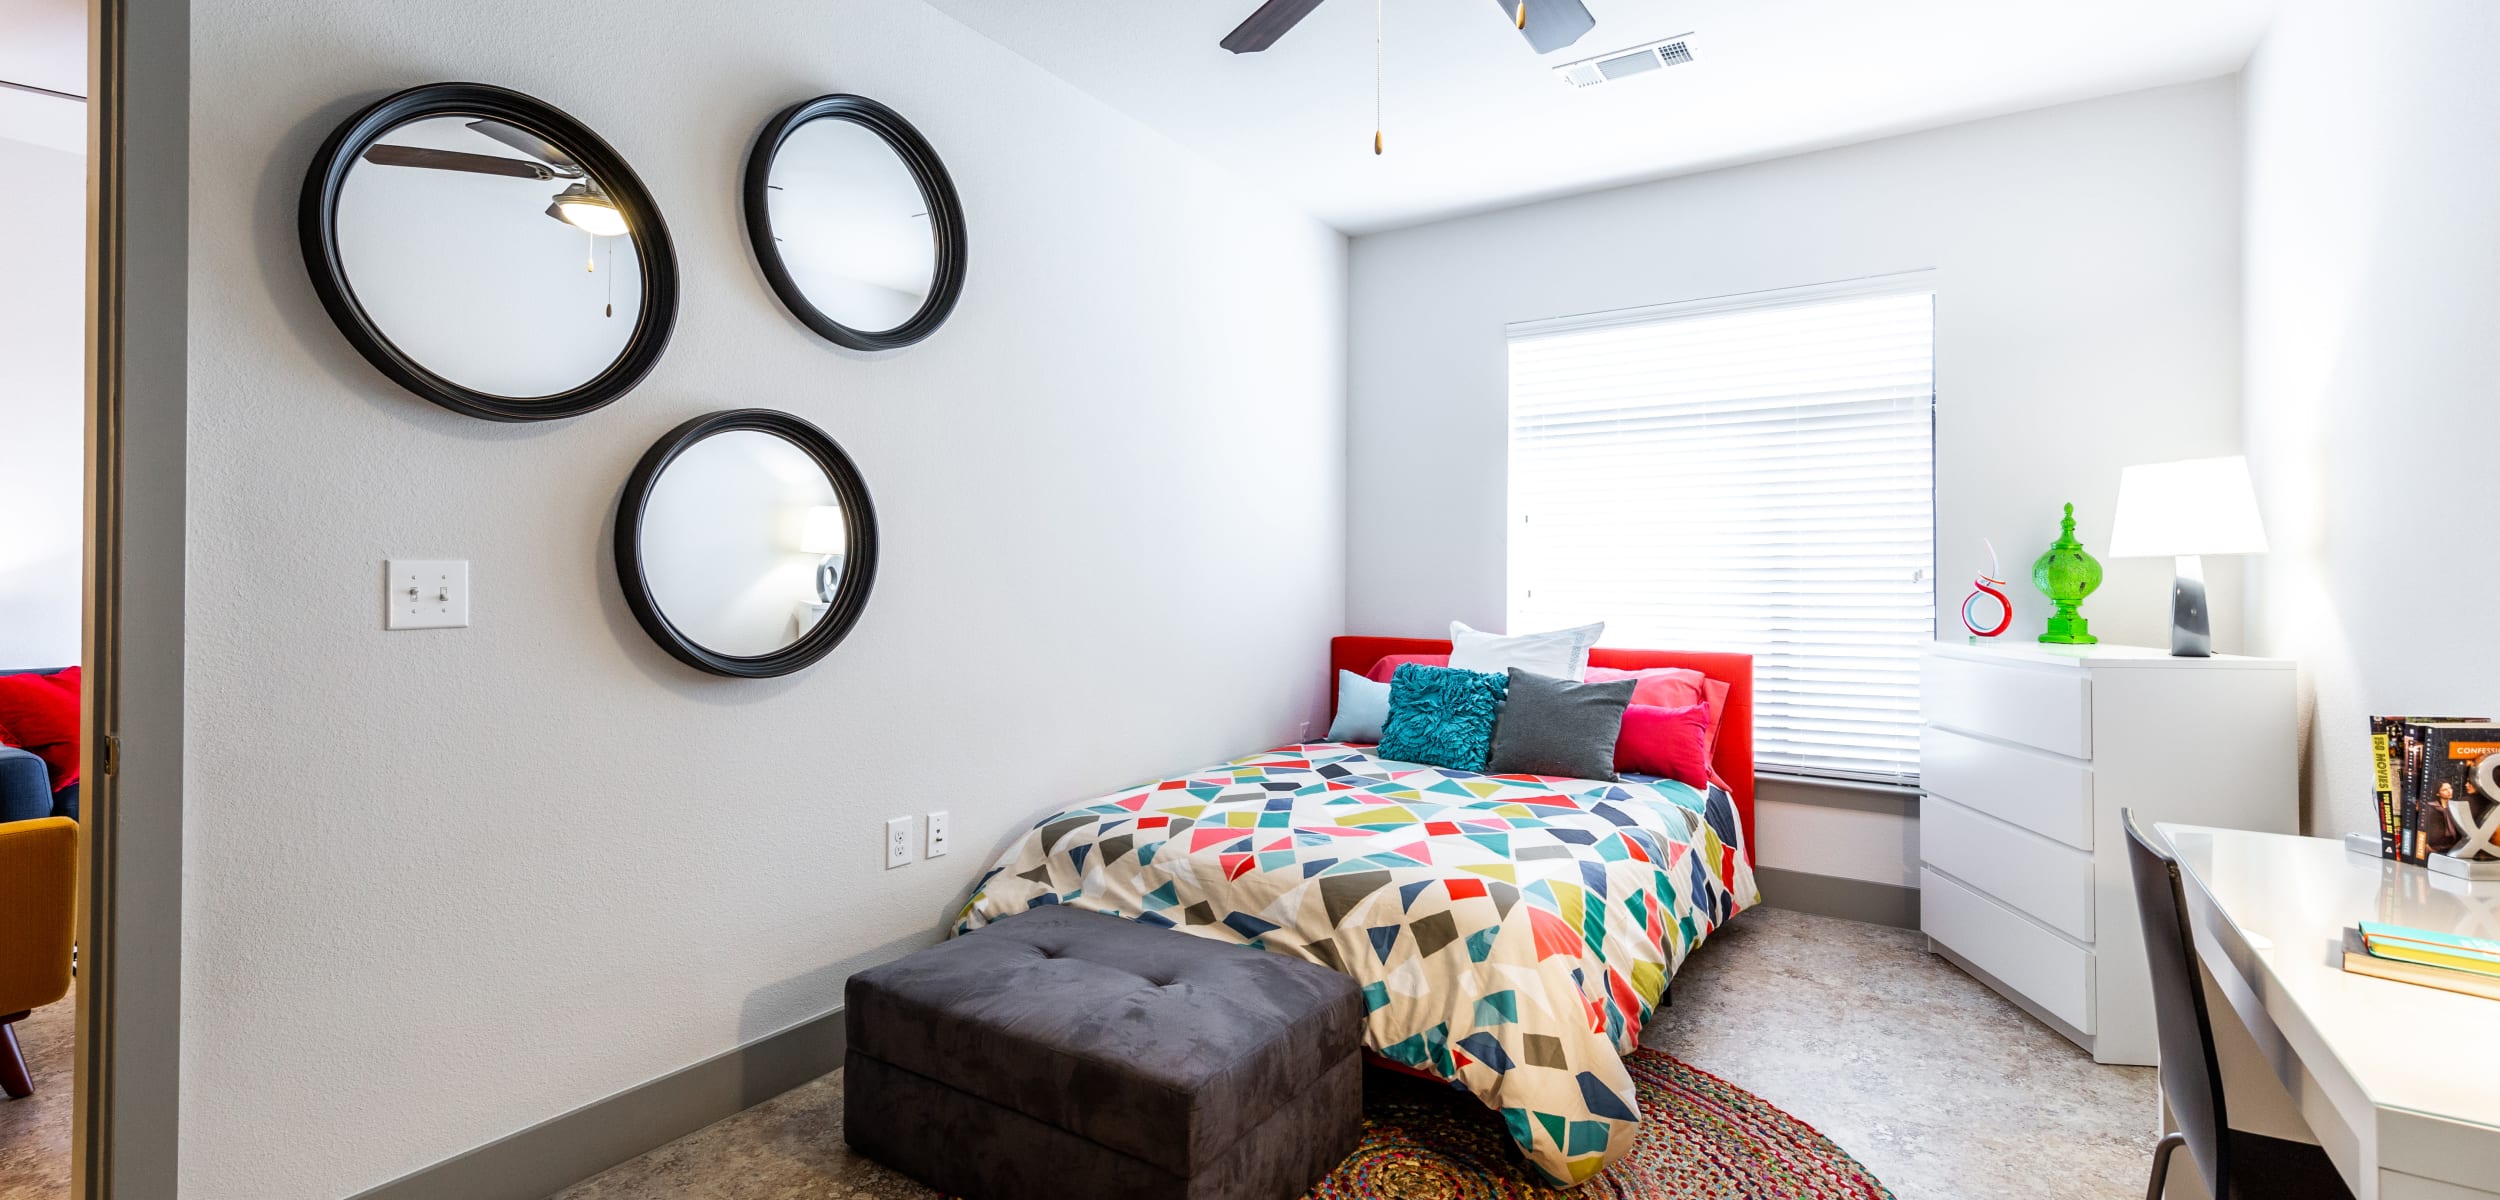 Bedroom with large window at Regents West at 24th in Austin, Texas